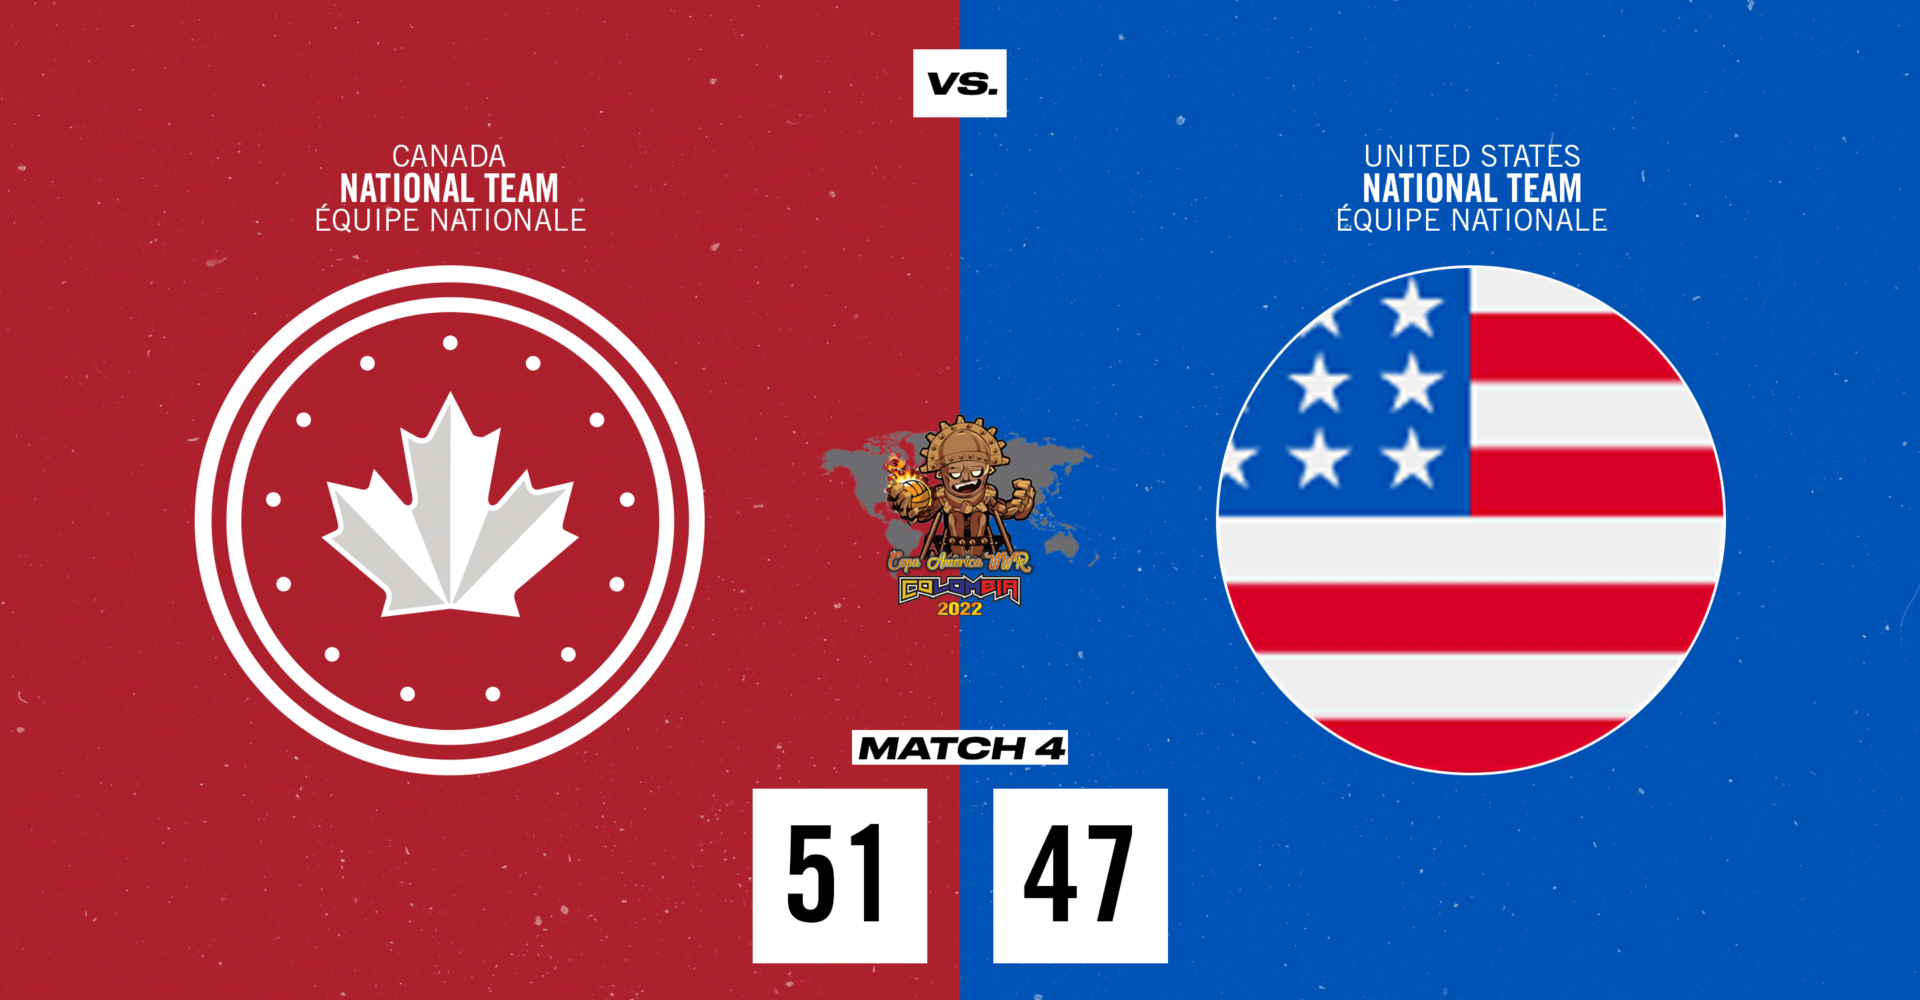 Canada Defeats USA 51-47, Remains Perfect in Americas Championship